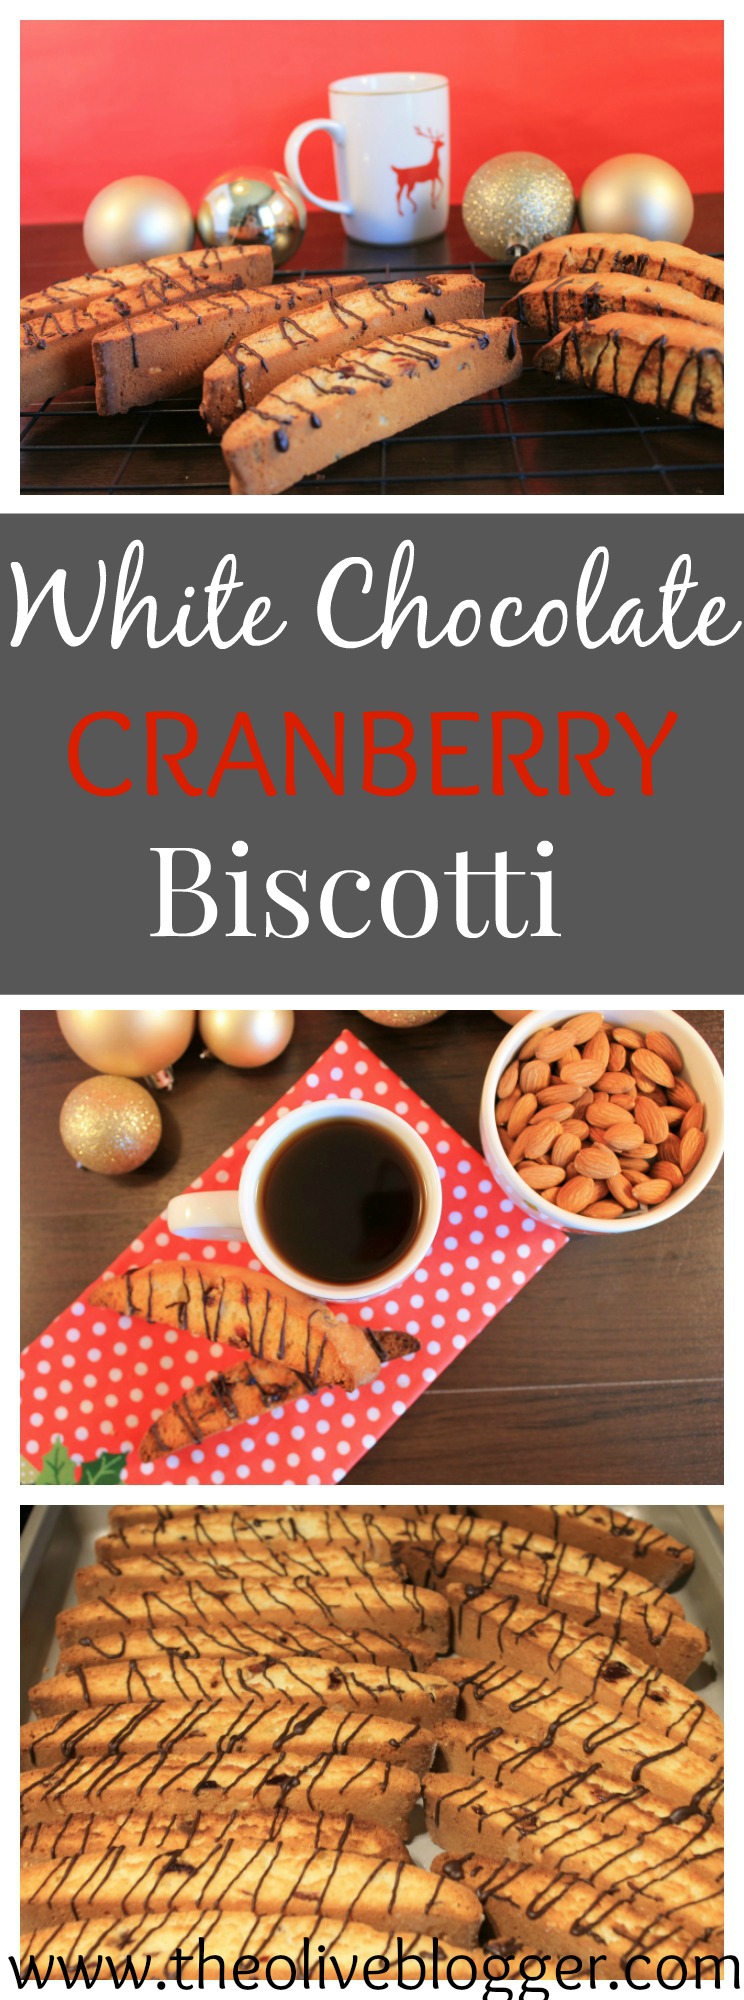 This White Chocolate Cranberry Biscotti cookie recipe is full of so much goodness! It is perfect with a cup of coffee, or as a late night snack...the flavors combine everything we love about the Holidays, and hope you enjoy too!